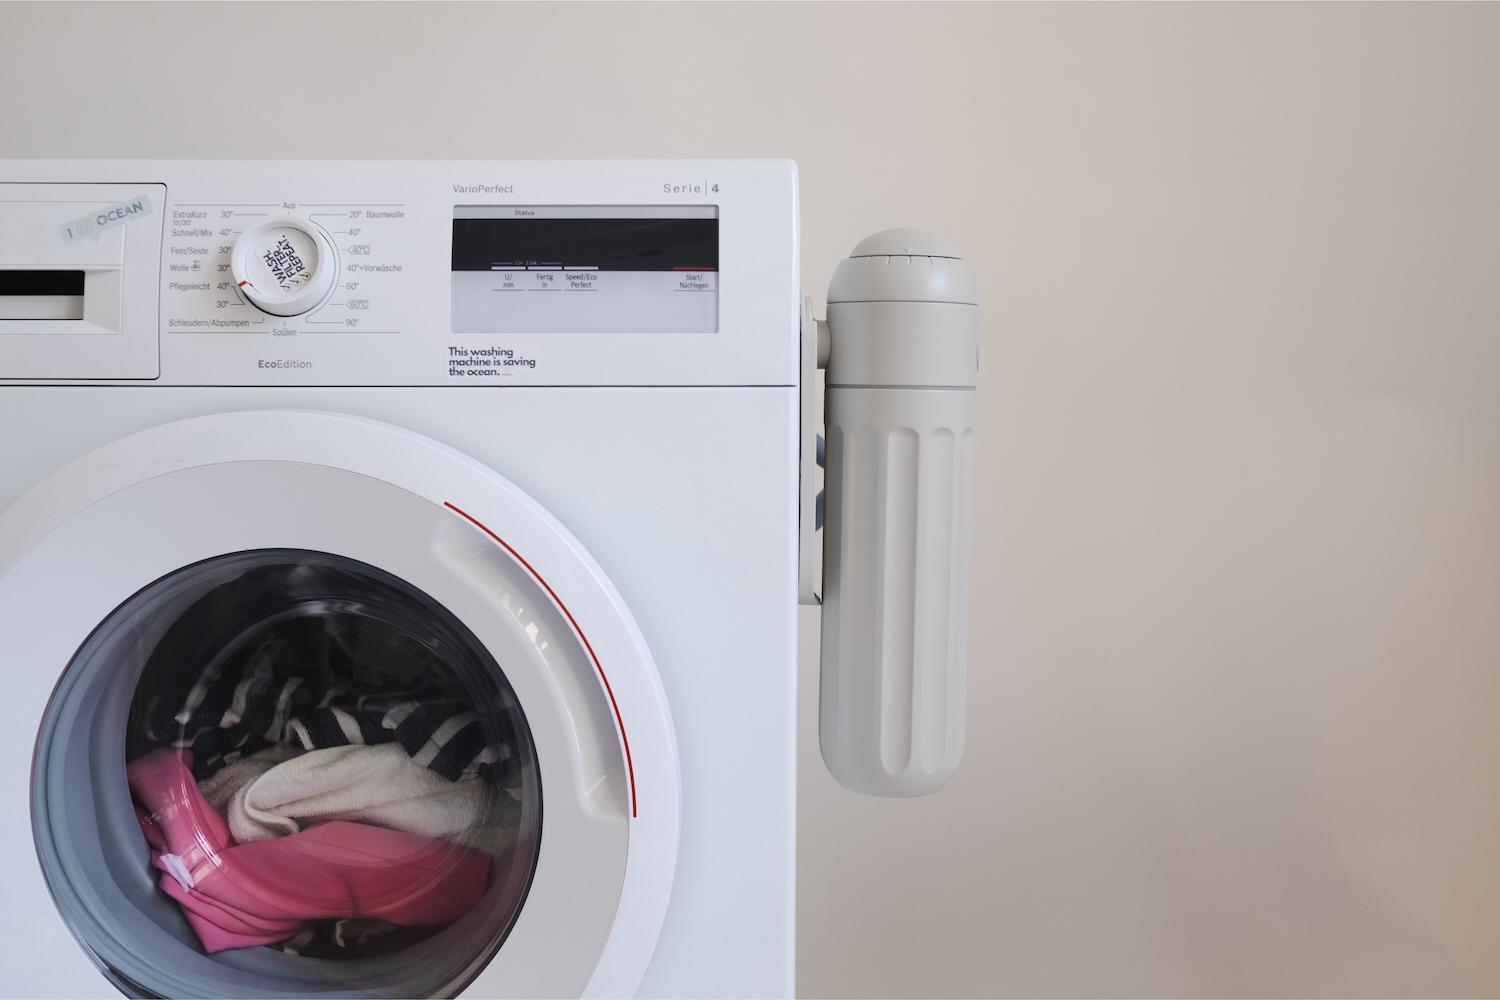 PlanetCare's microfiber filter attached to the side of a laundry machine.